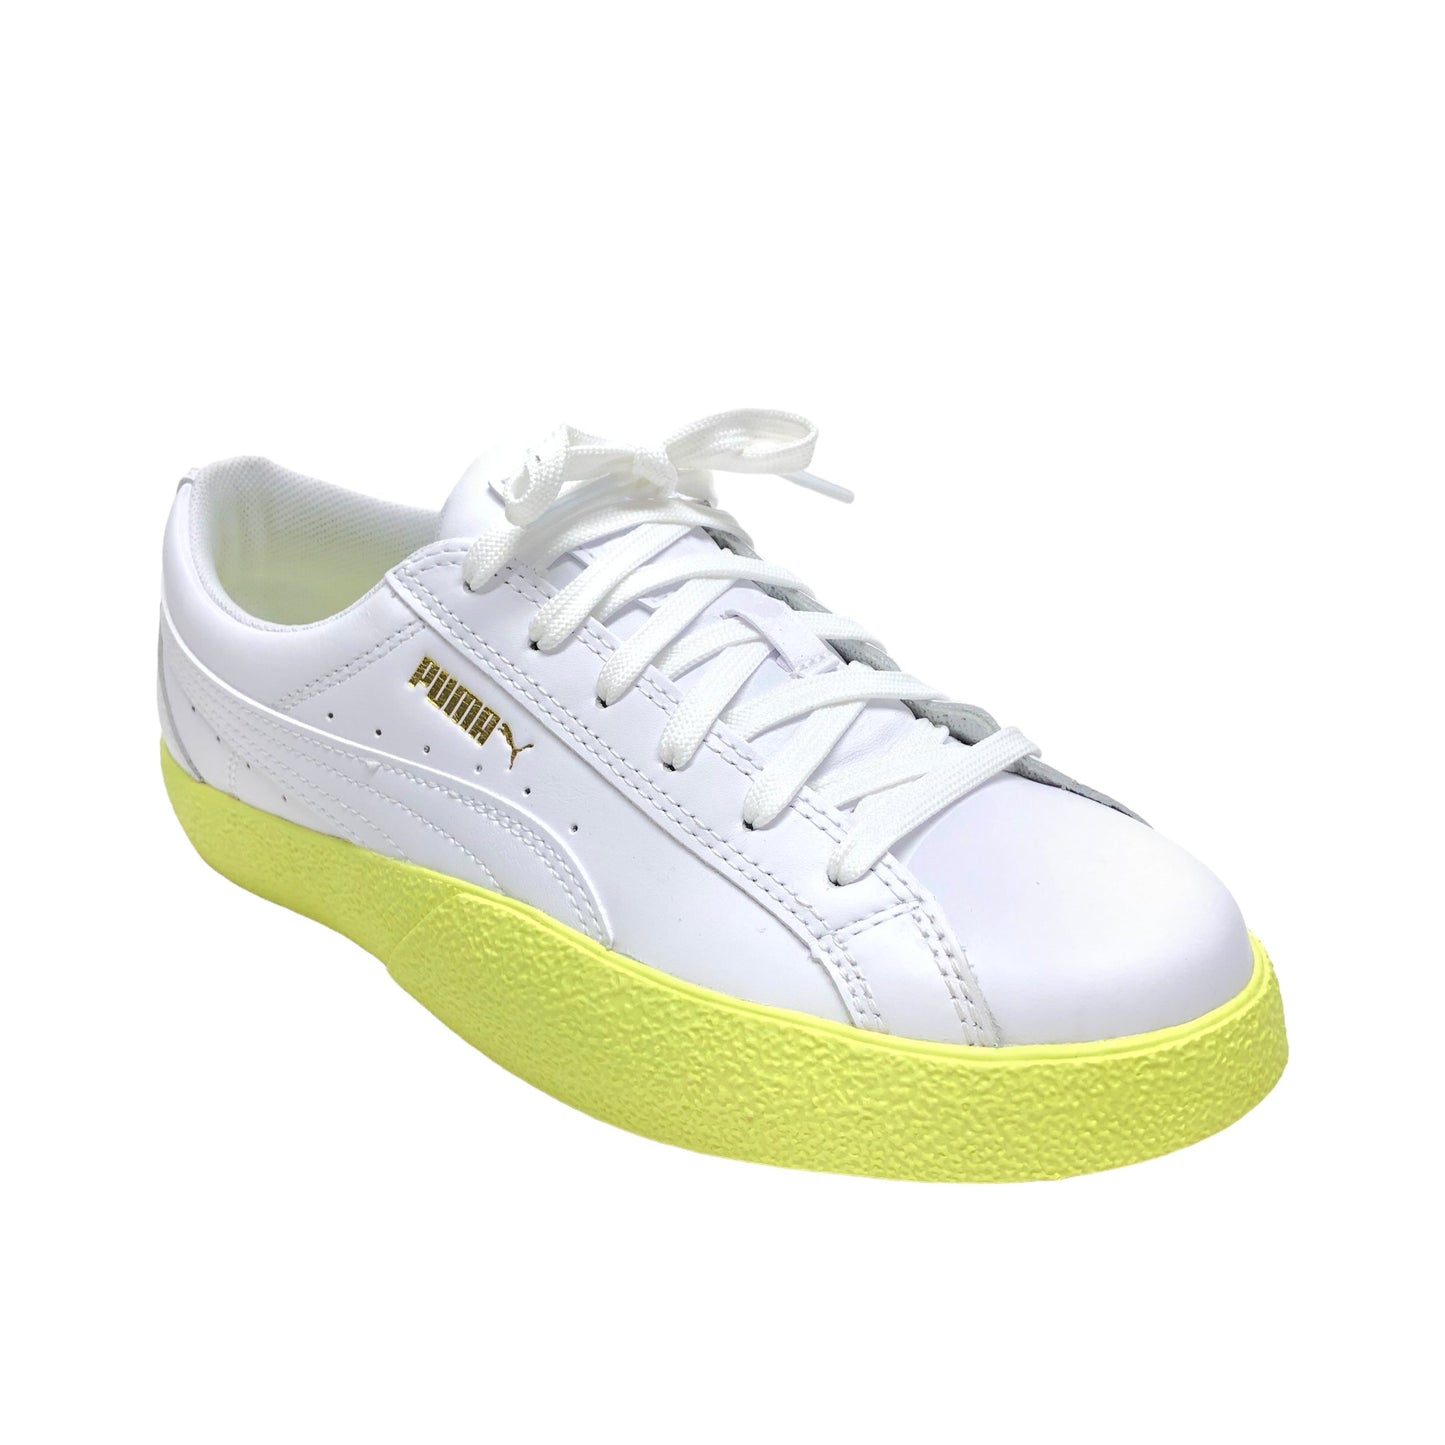 White & Yellow Shoes Sneakers Puma, Size 8